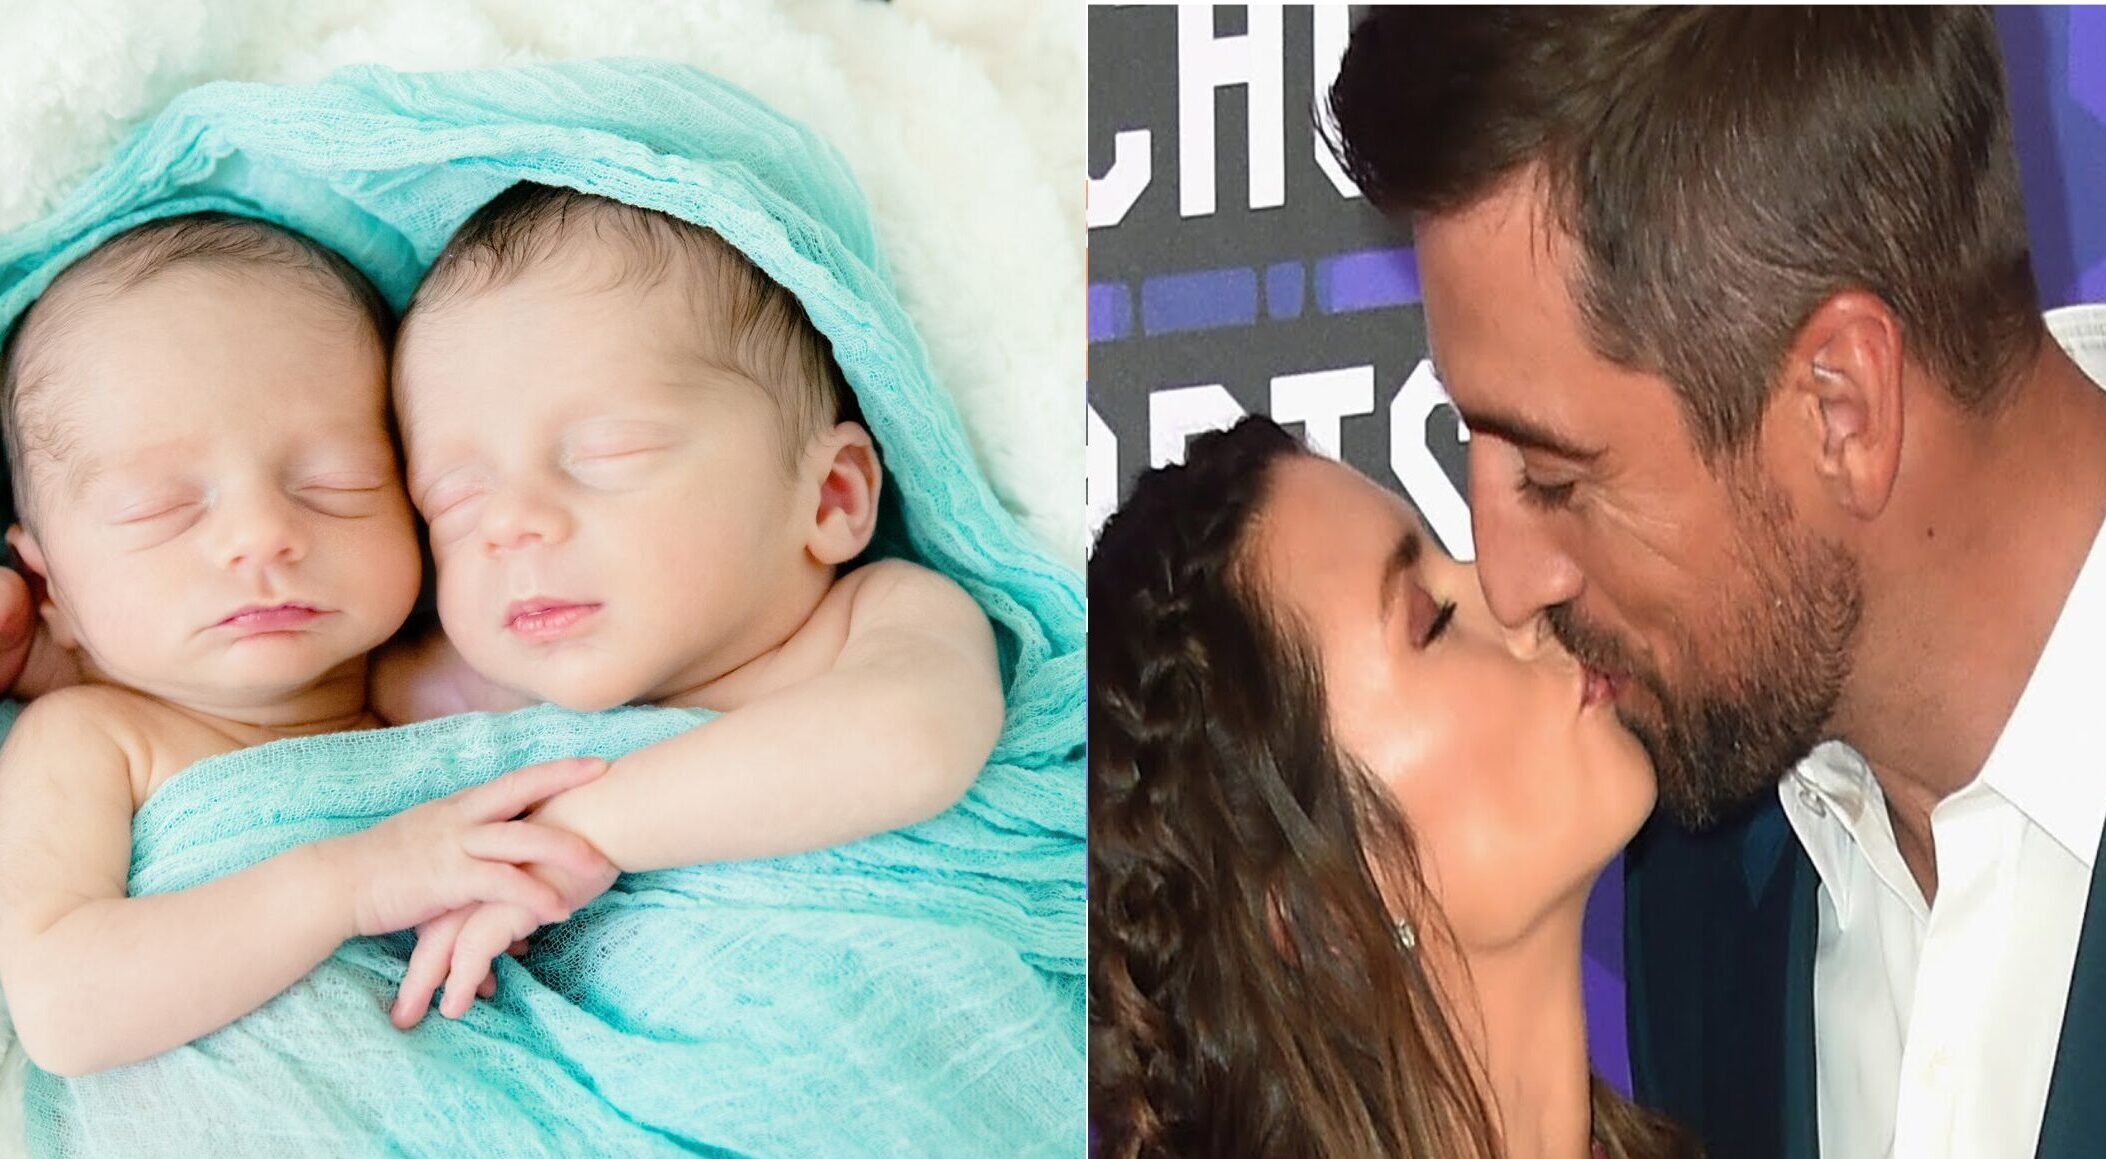 "I've never been happier in my life. It's unbelievable – I'm a dad now," said 40-year-old Jets quarterback Aaron Rodgers, tears of joy streaming down his face, as he welcomes his first child with his wonderful girlfriend.